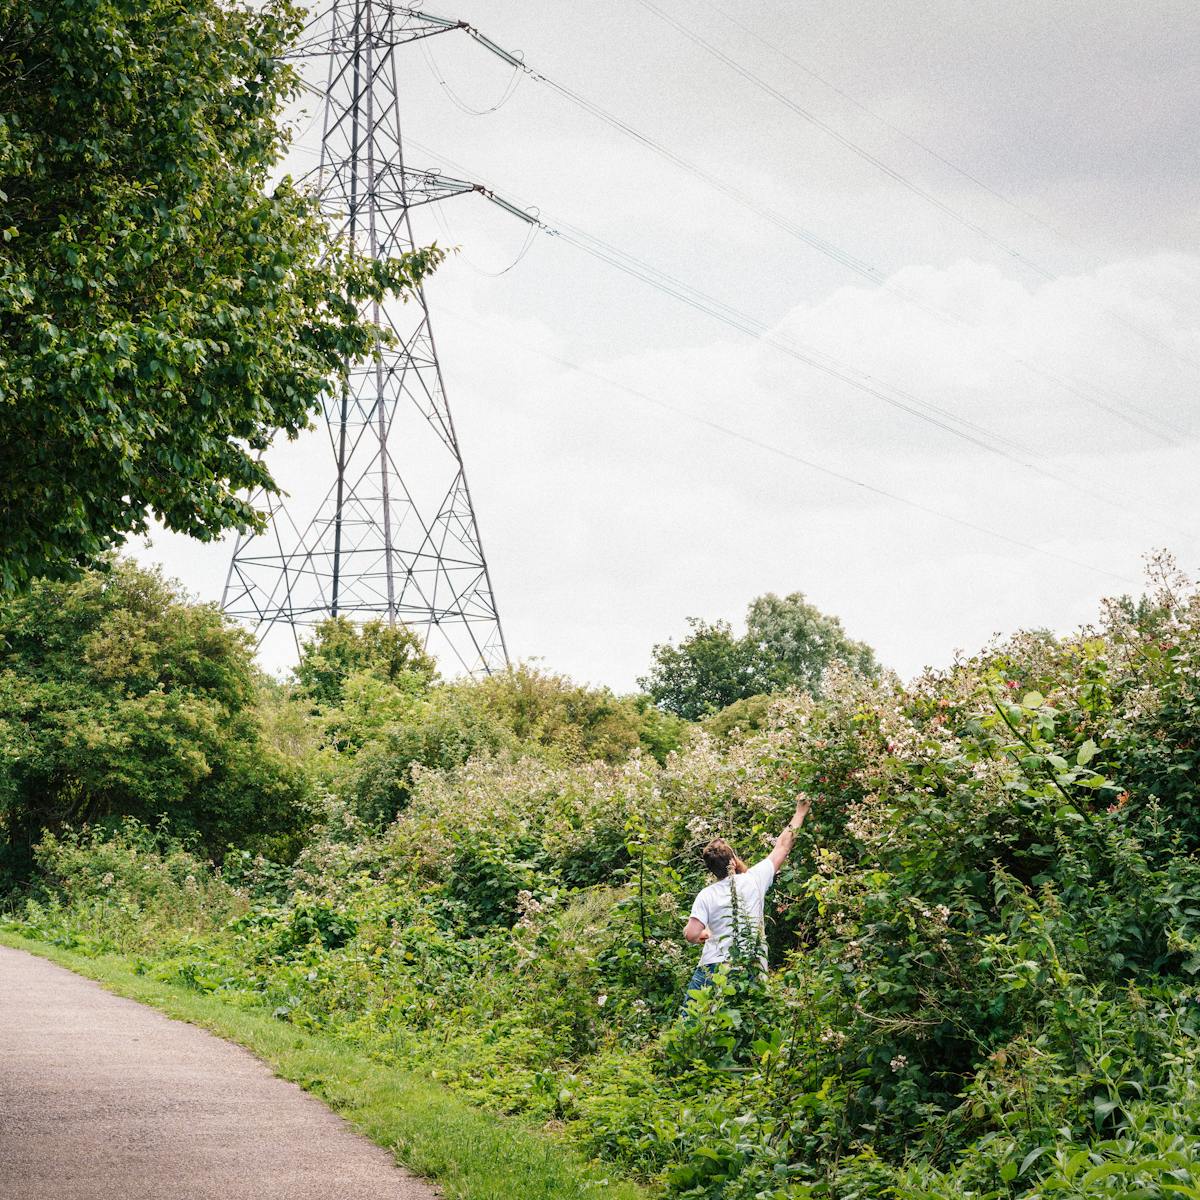 Photograph of a man wearing a white t-shirt in a landscape of trees and wild bushes. A sealed footpath snakes trough the scene and in the distance the overcast skyline is dominated by a large electricity pylon. The man is located in the overgrown verge, reaching up to pick flowers.